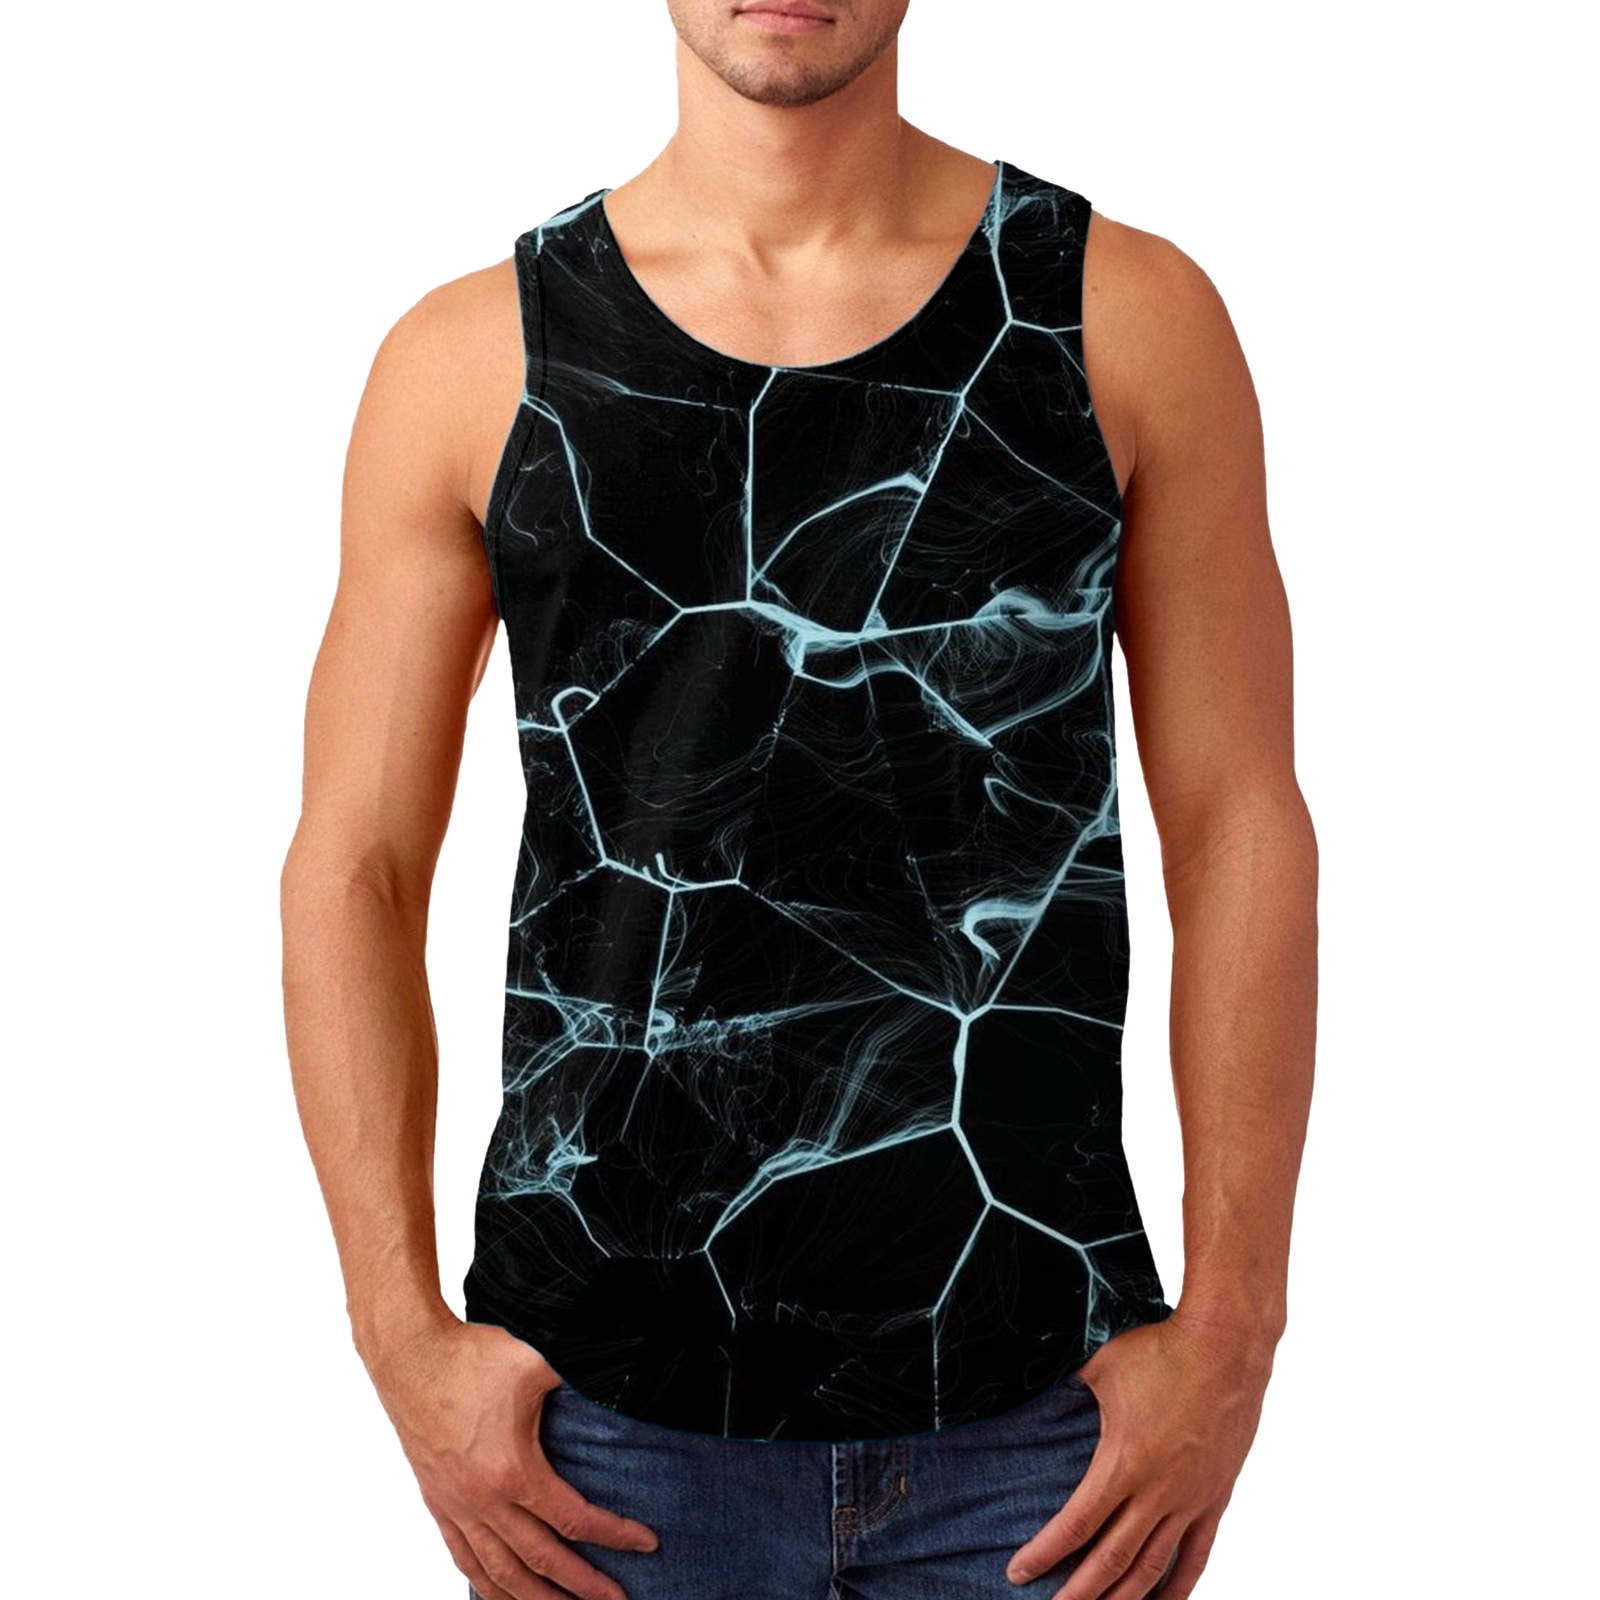  YoungLA Elongated Tank Tops for Men, Workout Muscle Gym Shirts, Bodybuilding Stringers